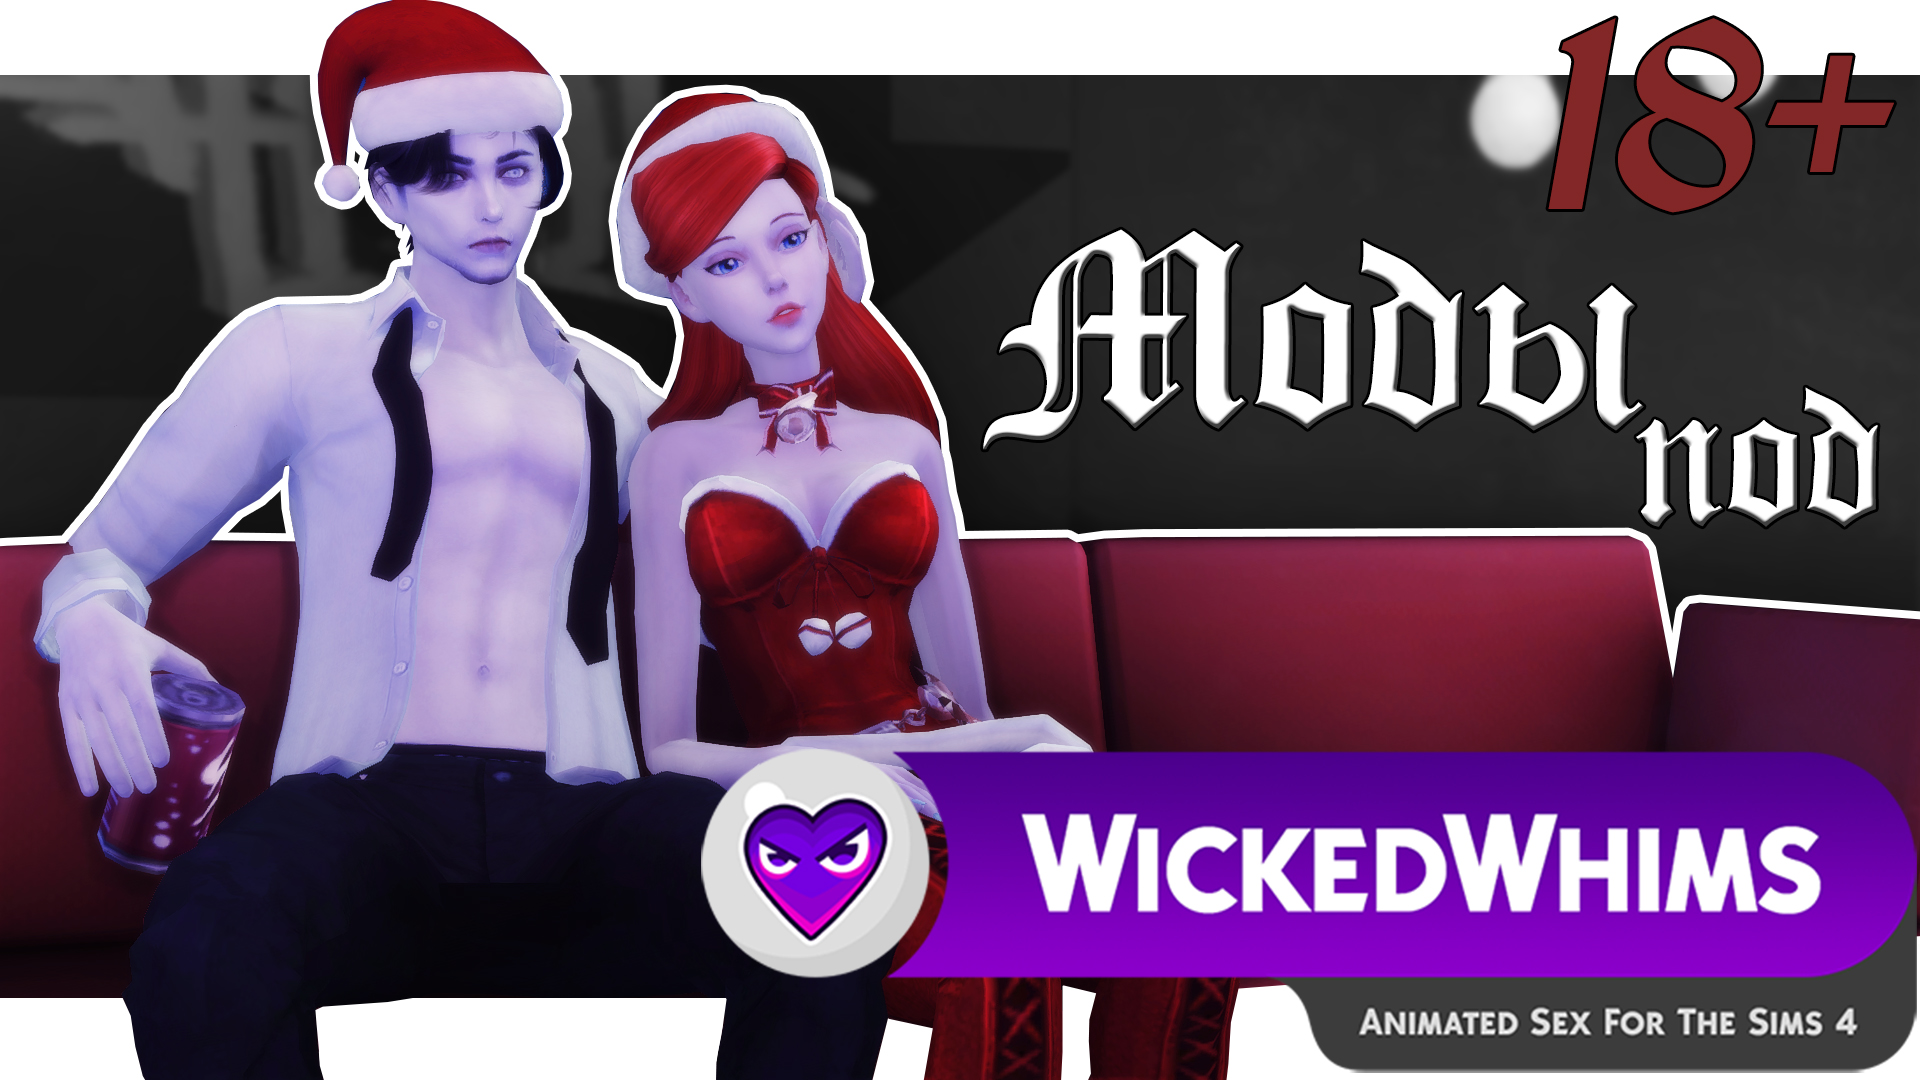 Wicked whims позы